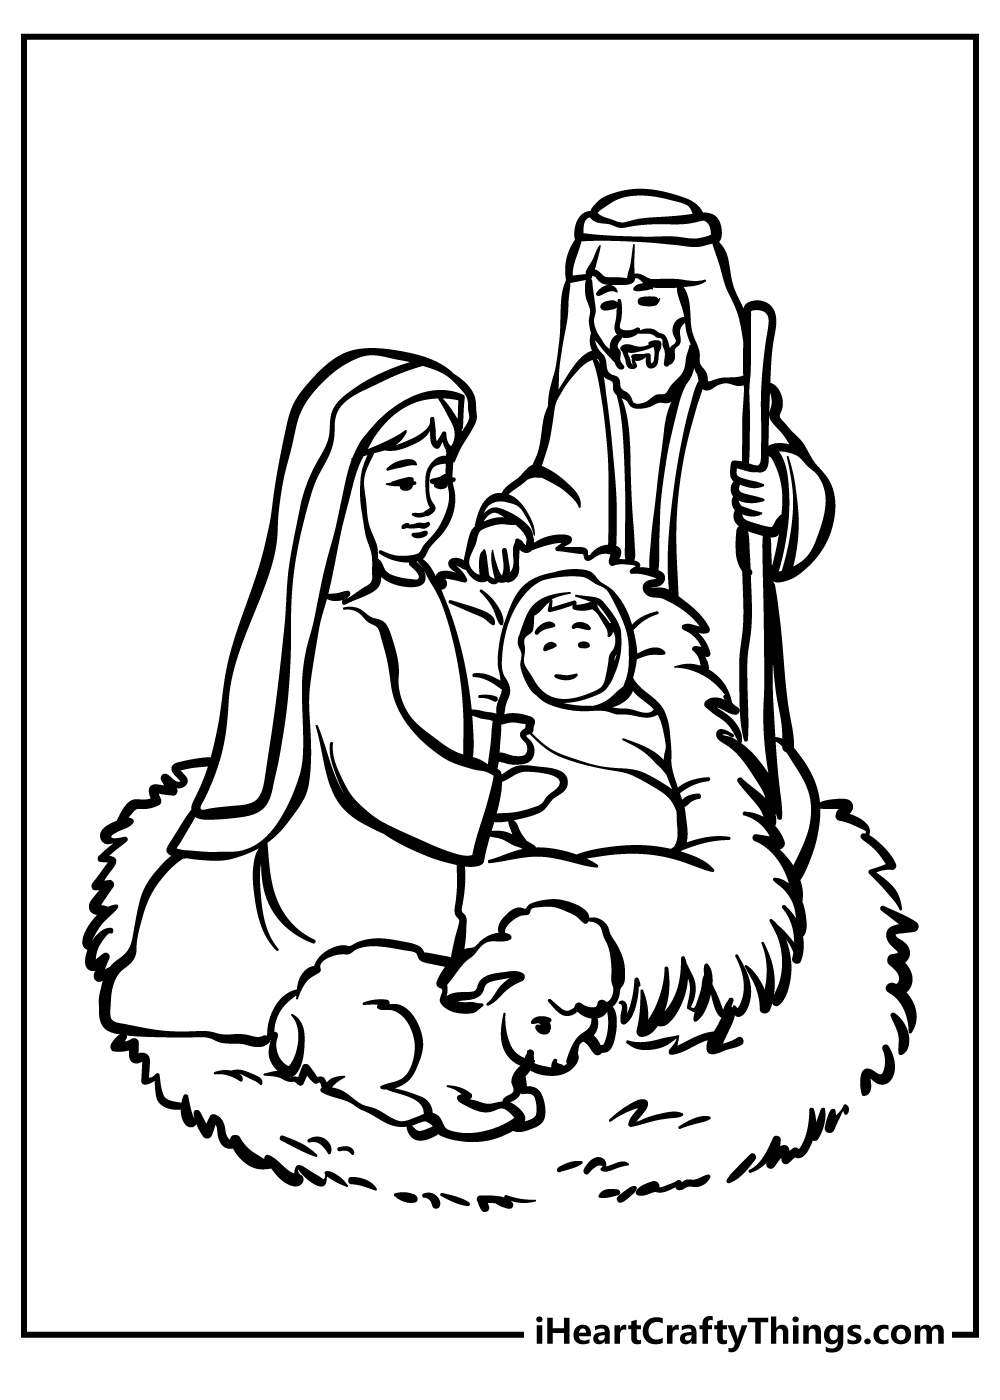 Nativity Coloring Book for kids free printable